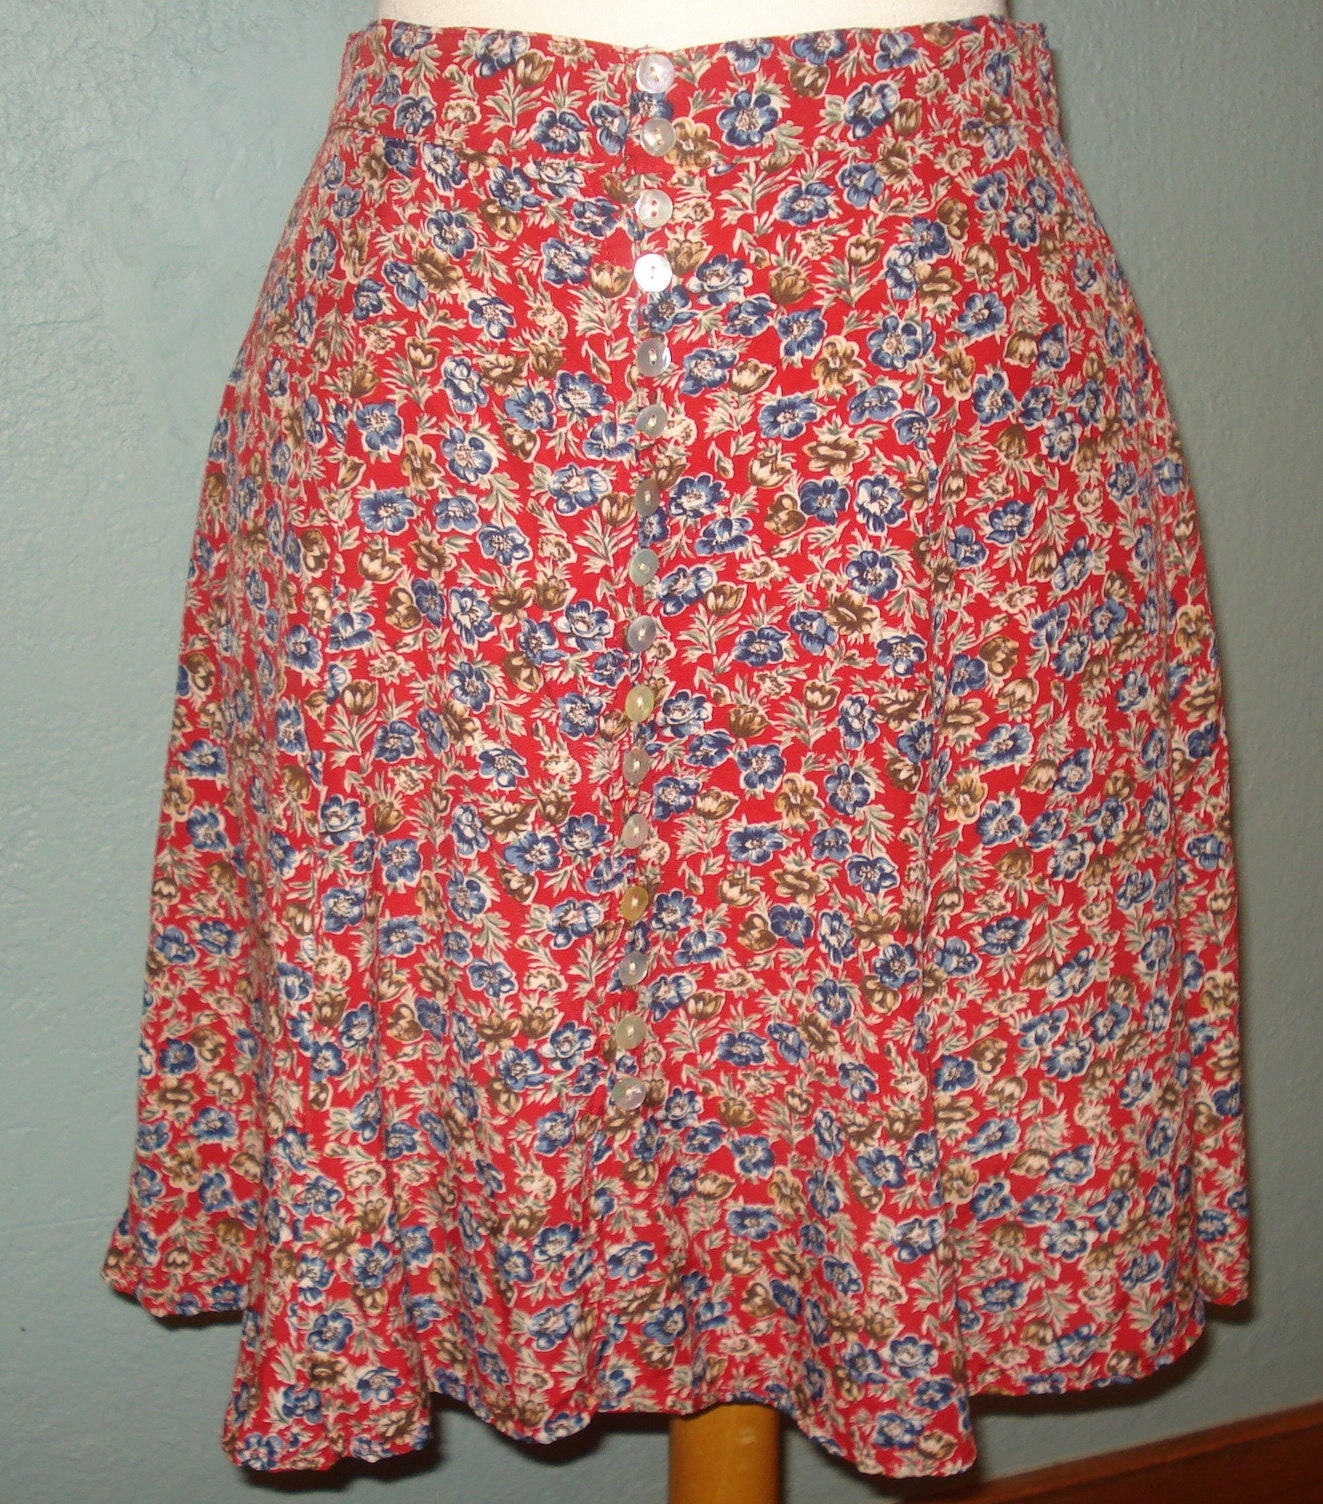 Vintage Calico Print Short Flared Skirt By Central Falls Size 10 Floral ...